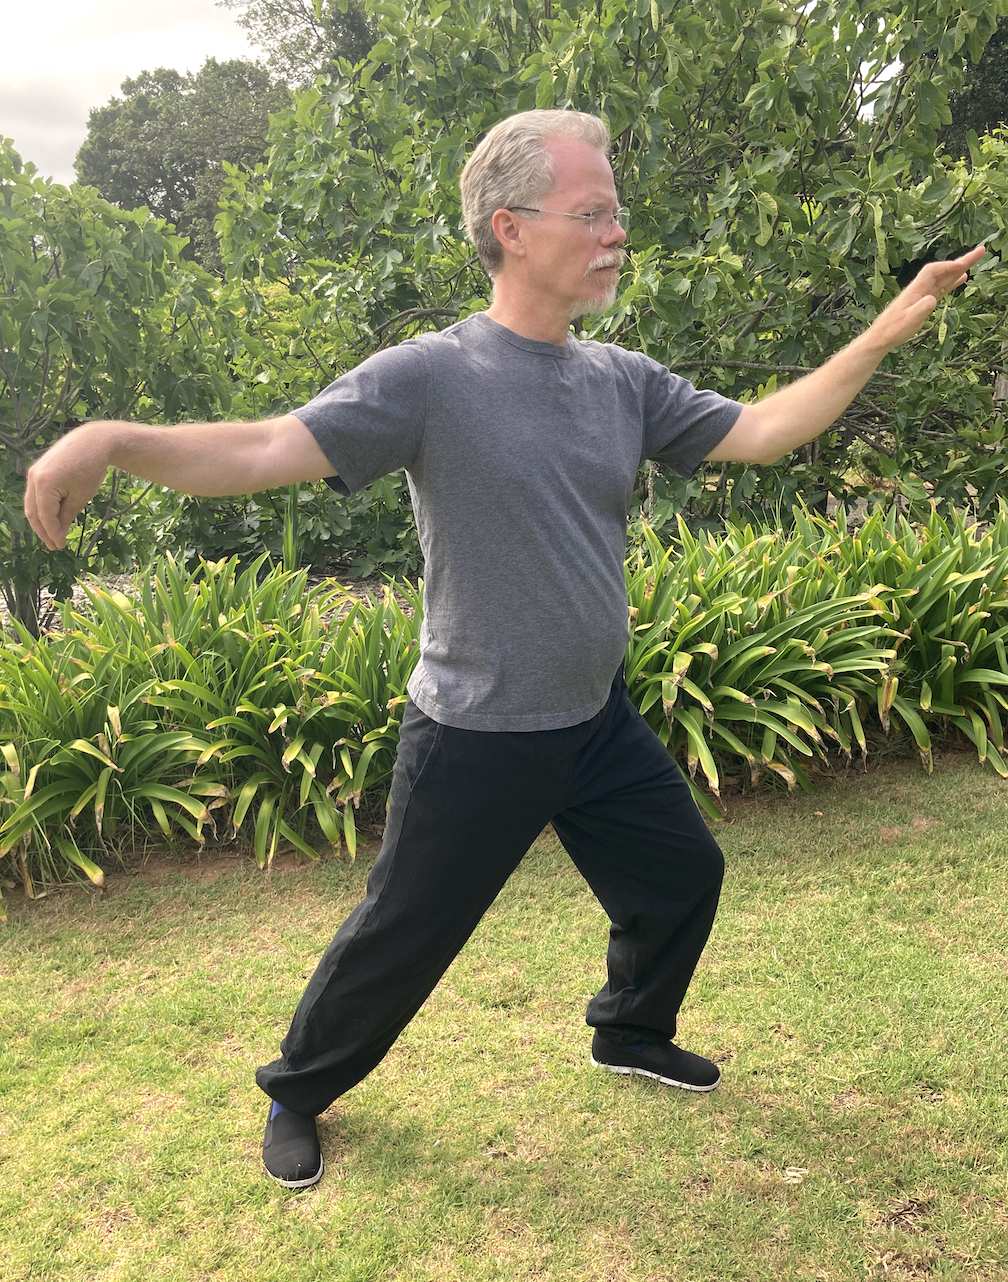 How to Improve Balance with Tai Chi - The Senior Centered PT